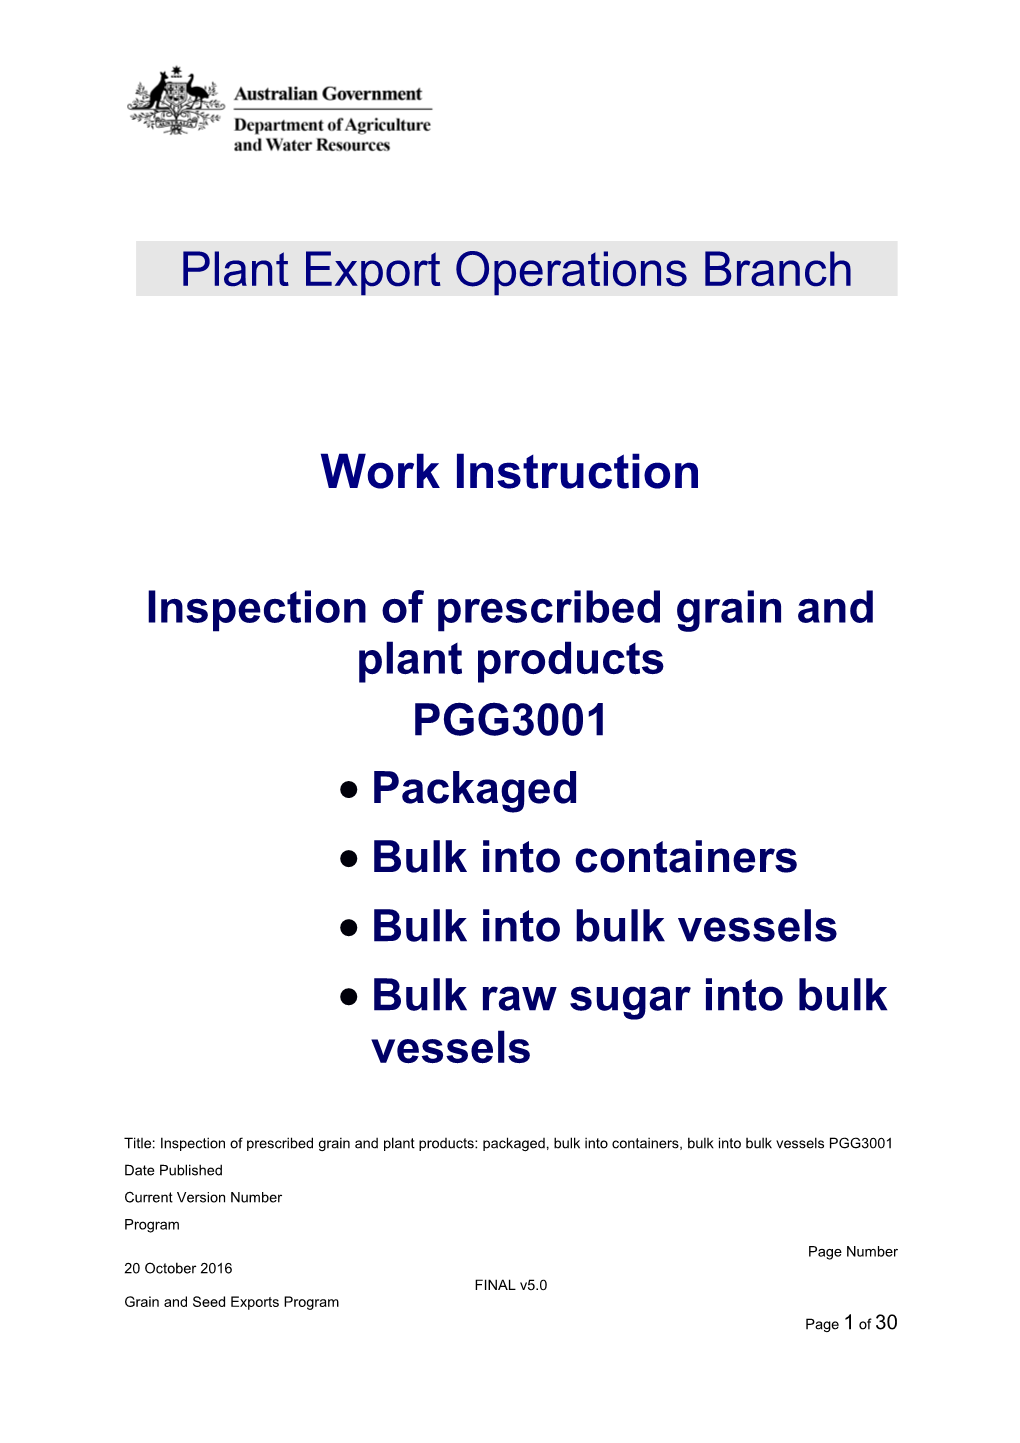 Work Instruction Inspection of Prescribed Grain and Plant Products